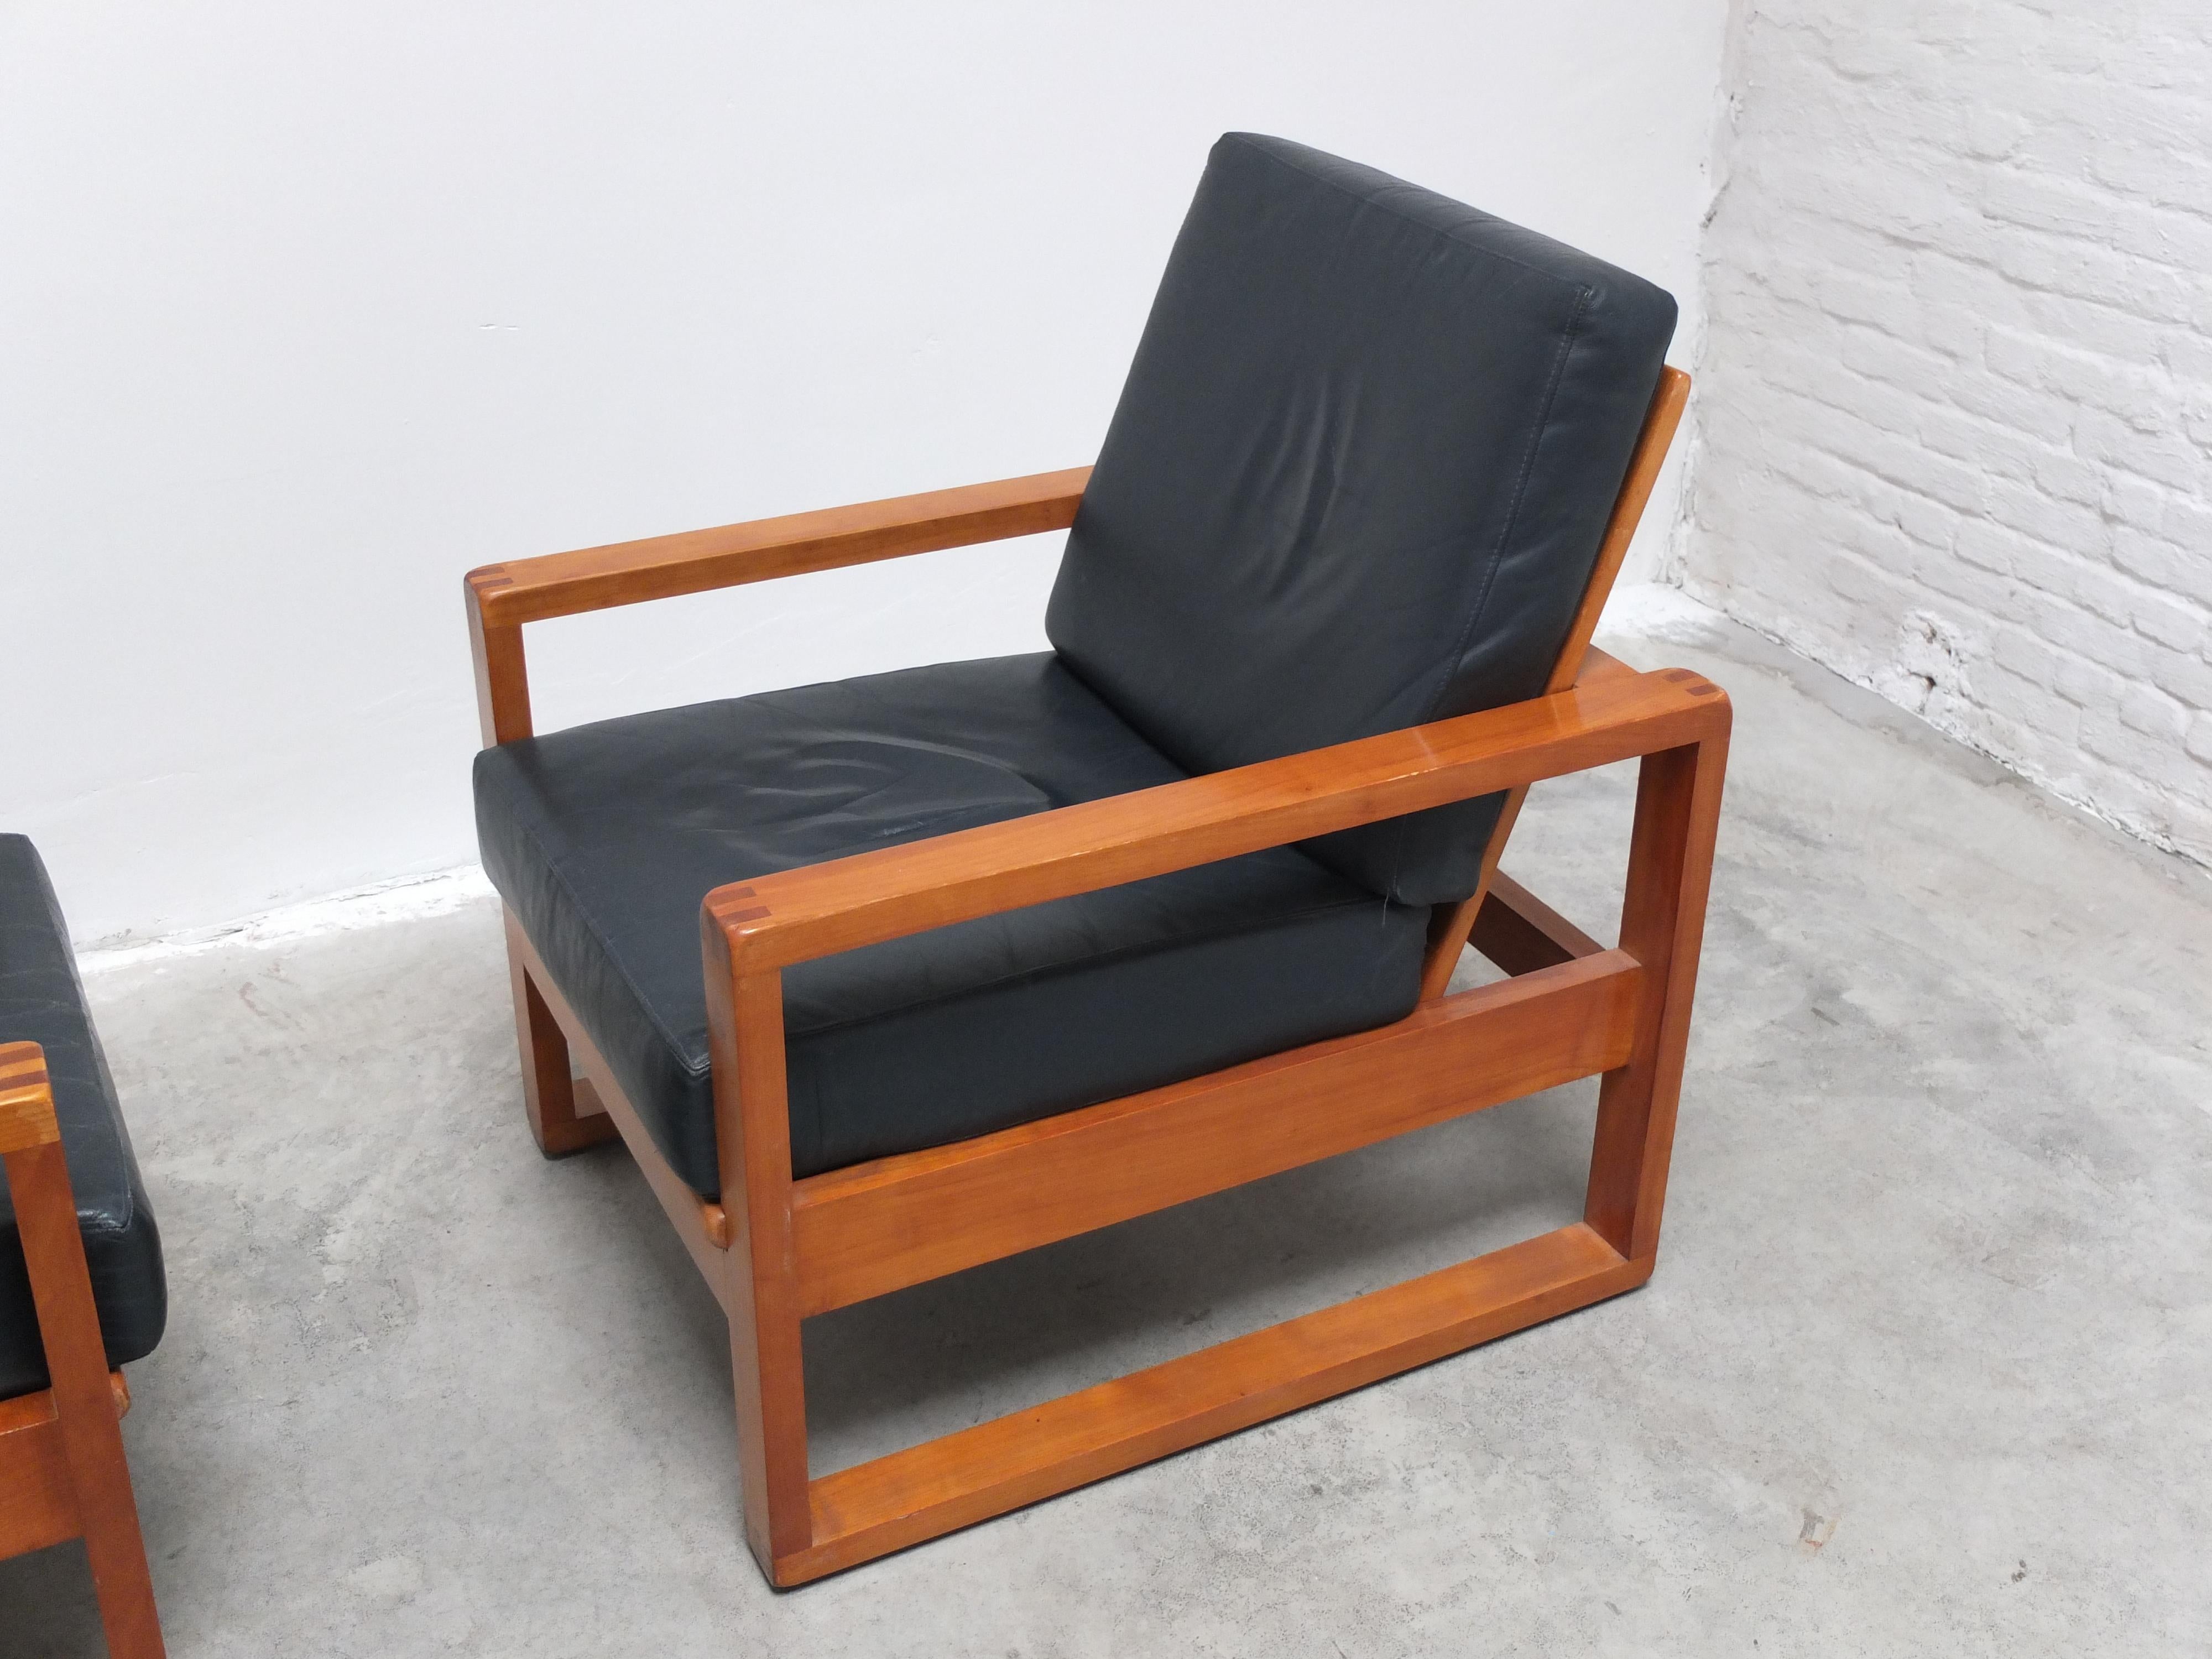 Unique Pair of Modernist Lounge Chairs by Van Den Berghe-Pauvers, 1960s For Sale 1